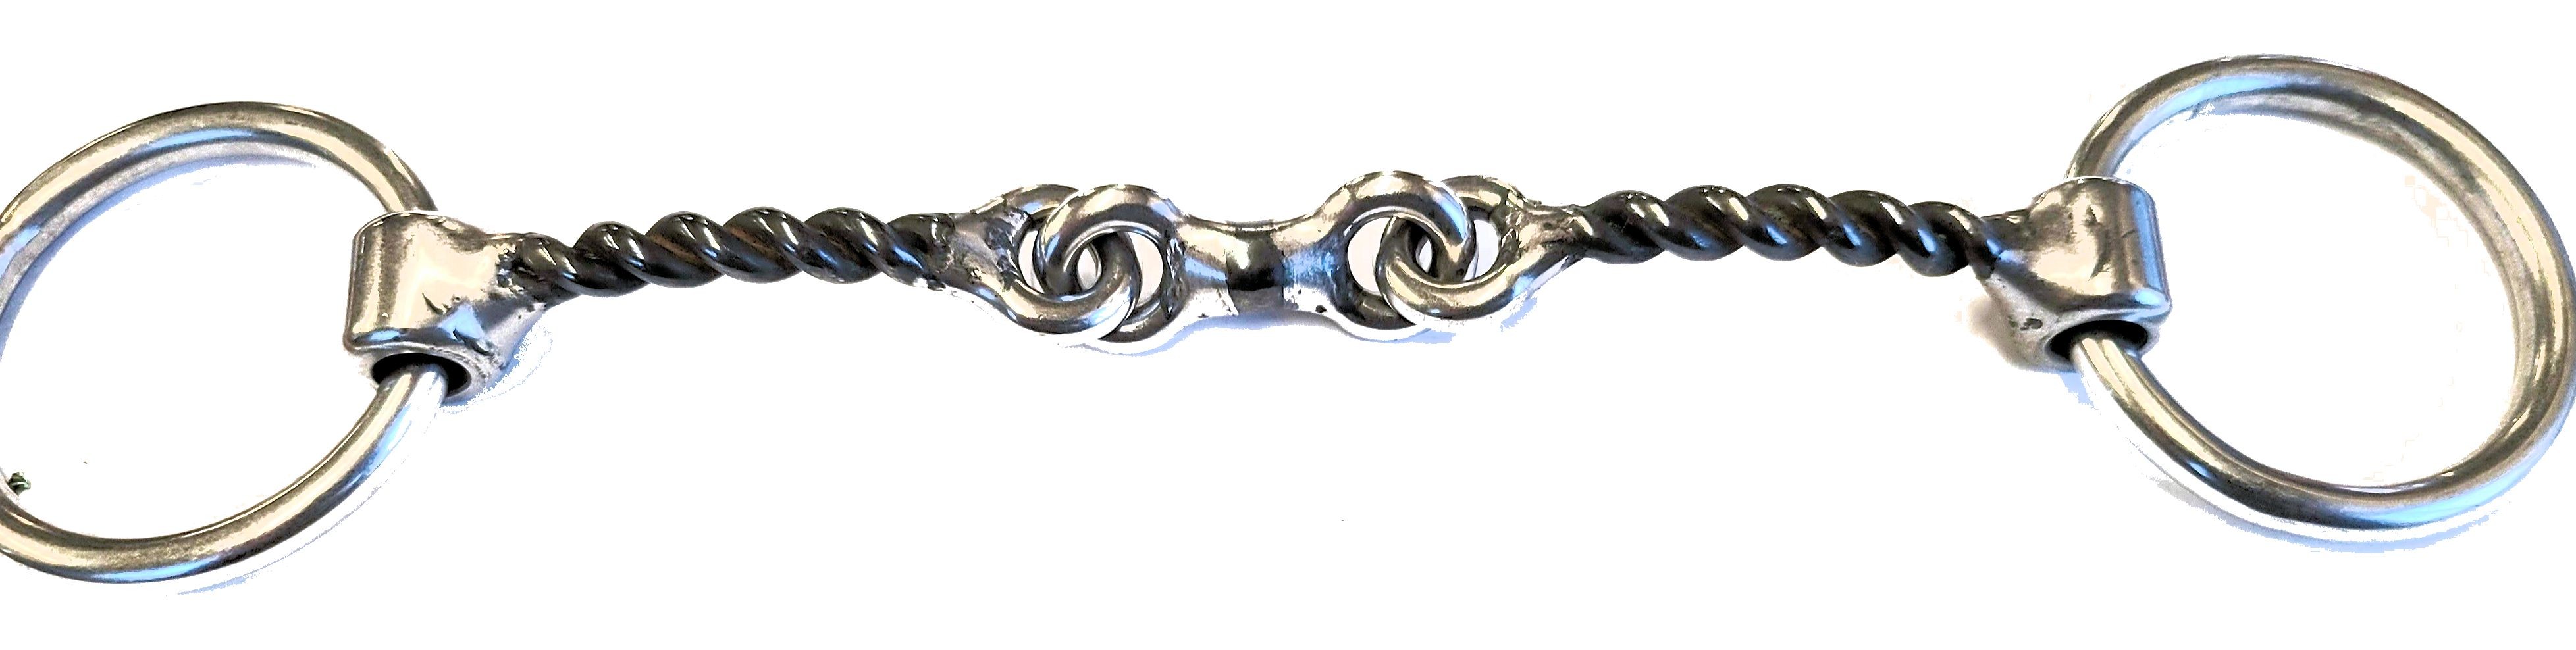 1/4" Twisted Wire, Dog Bone Center with Loose Rings Bradoon  Out of stock until June